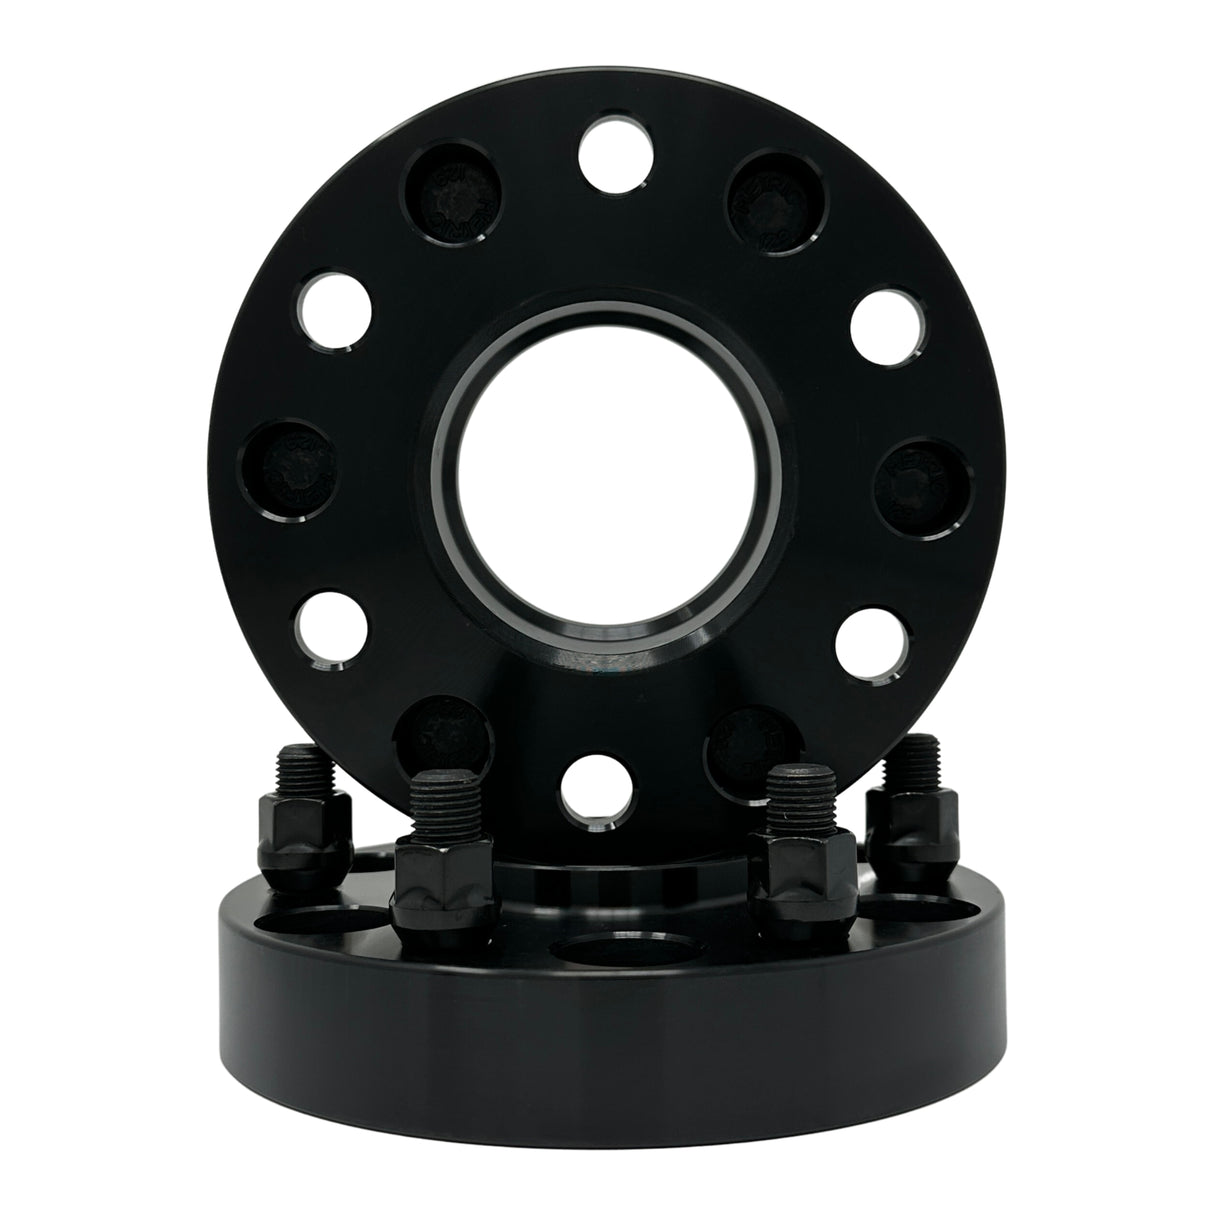 Chevy GMC 6x5.5 to 6x135 (Ford) Hubcentric Wheel Adapters For Silverado, Sierra, Tahoe 6x139.7 | 78.1mm (Chevy Hub) to 87.1 (Ford Wheels) Centering Lip | 14x1.5 Studs 1.25" Inch - 2" Inch Thicknesses Also Fits Yukon, Escalade + More